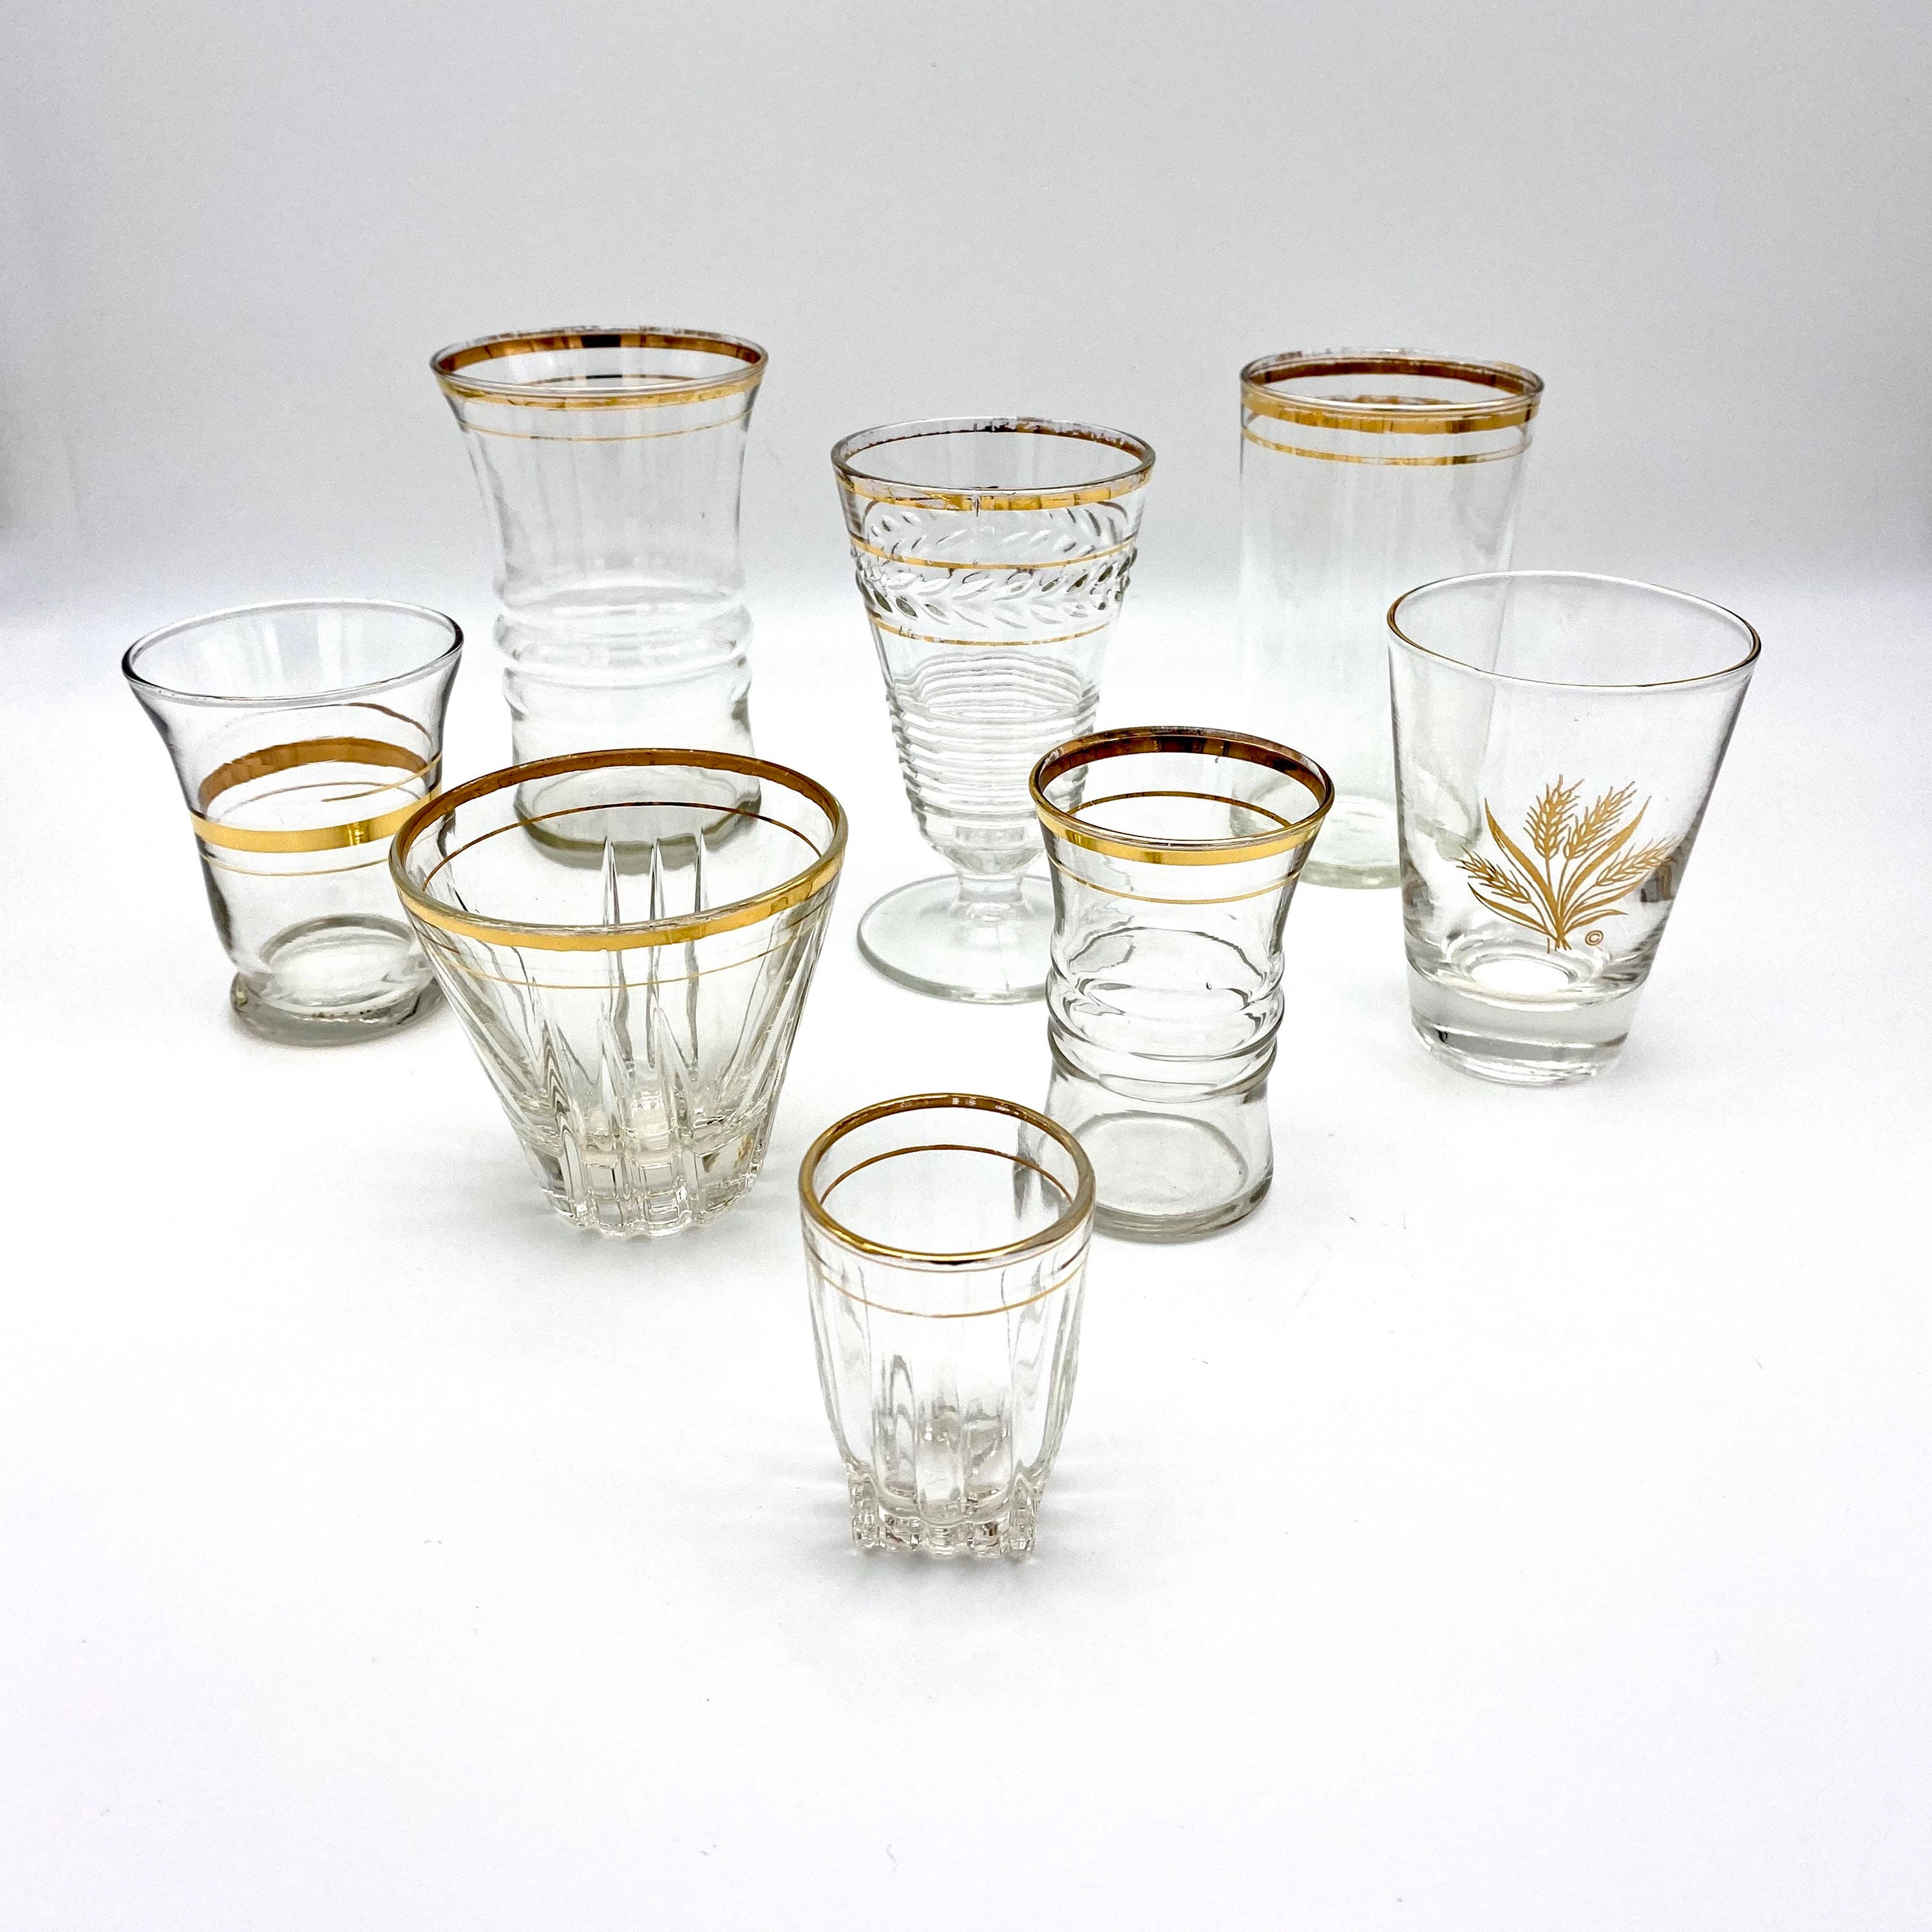 wookgreat Vintage Drinking Glasses Set of 12, Textured Clear Striped Glass  Cups-6 Highball Glasses 1…See more wookgreat Vintage Drinking Glasses Set